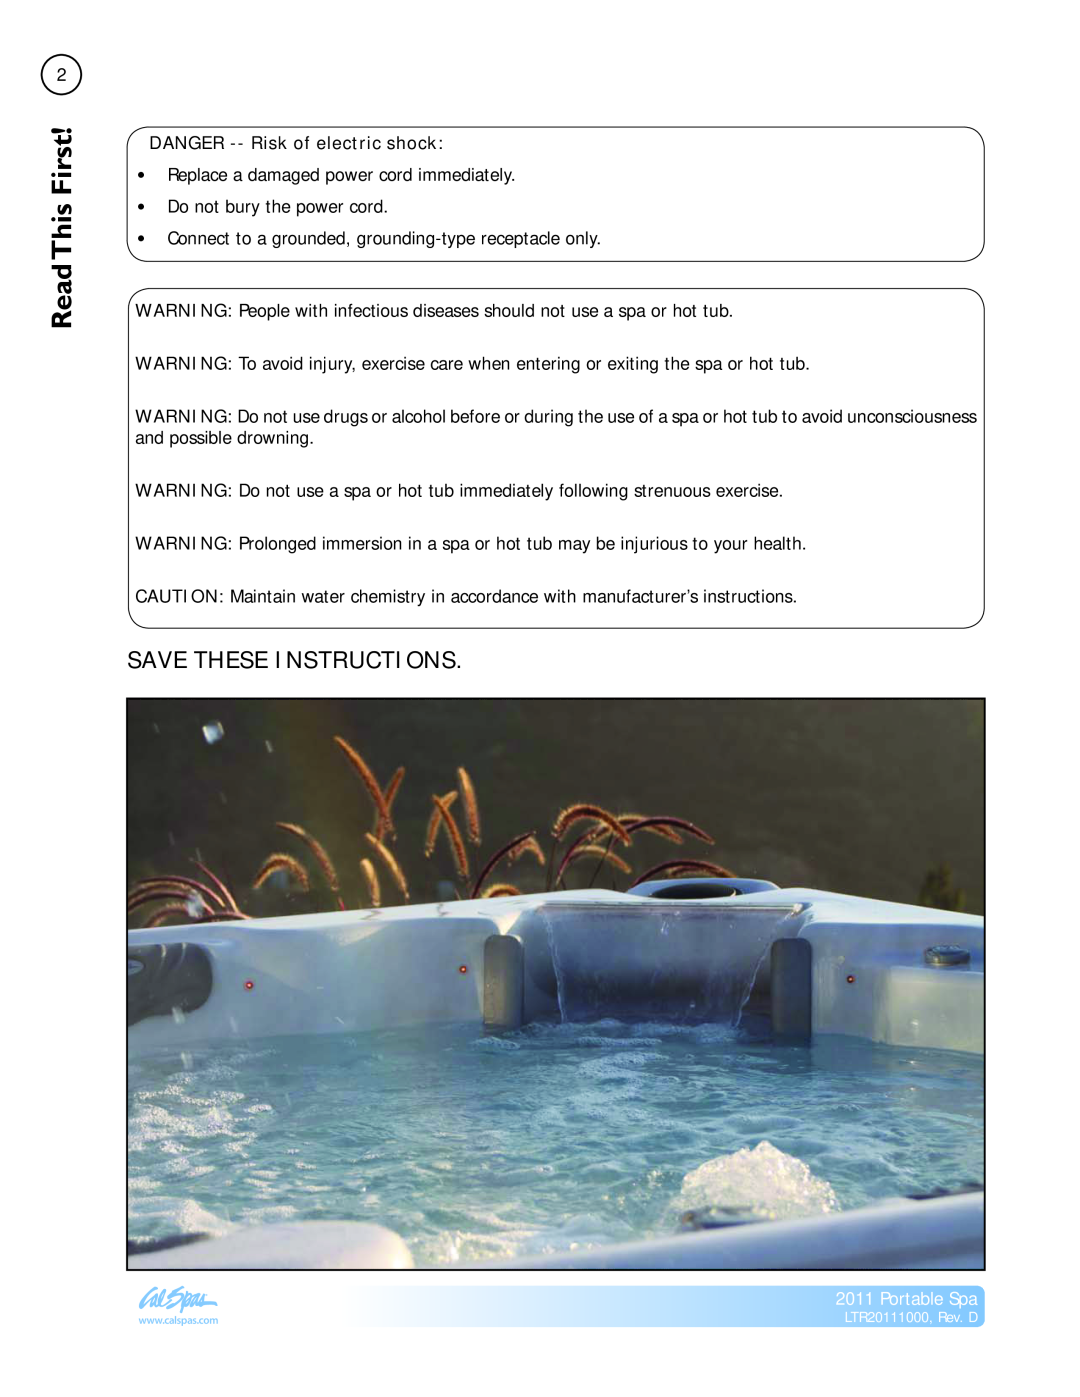 Cal Spas LTR20111000 manual Read First!This, Save These Instructions, Portable Spa 